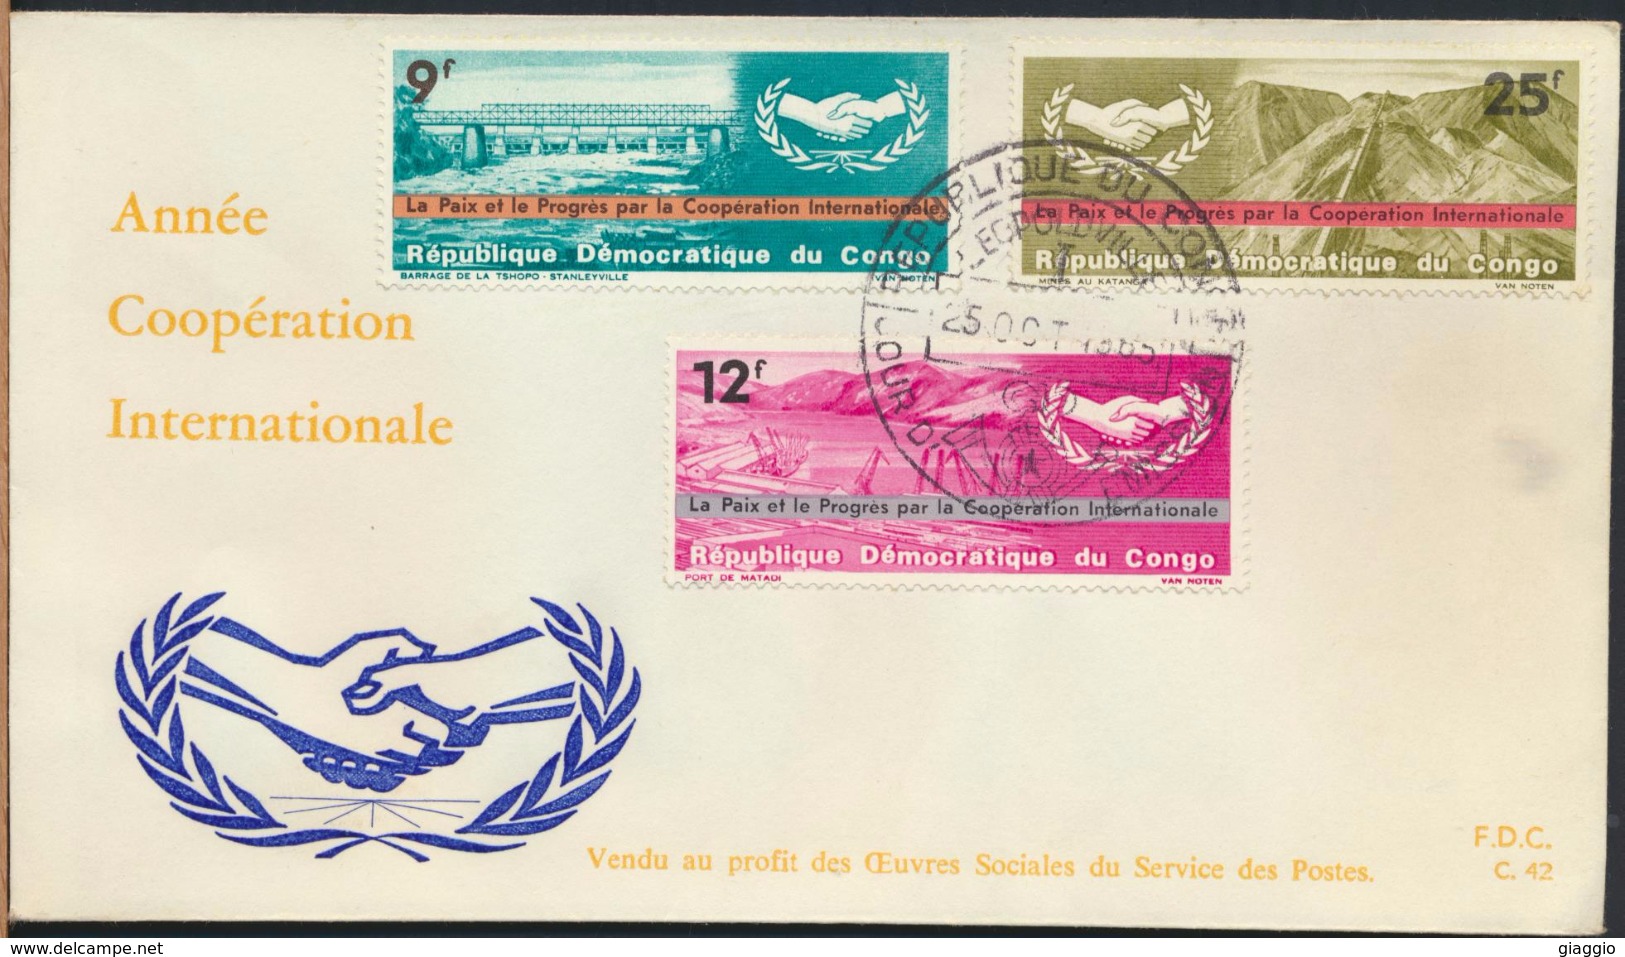 °°° CONGO - FDC - ANNEE COOPERATION INTERNATIONALE - 1965 °°° - FDC